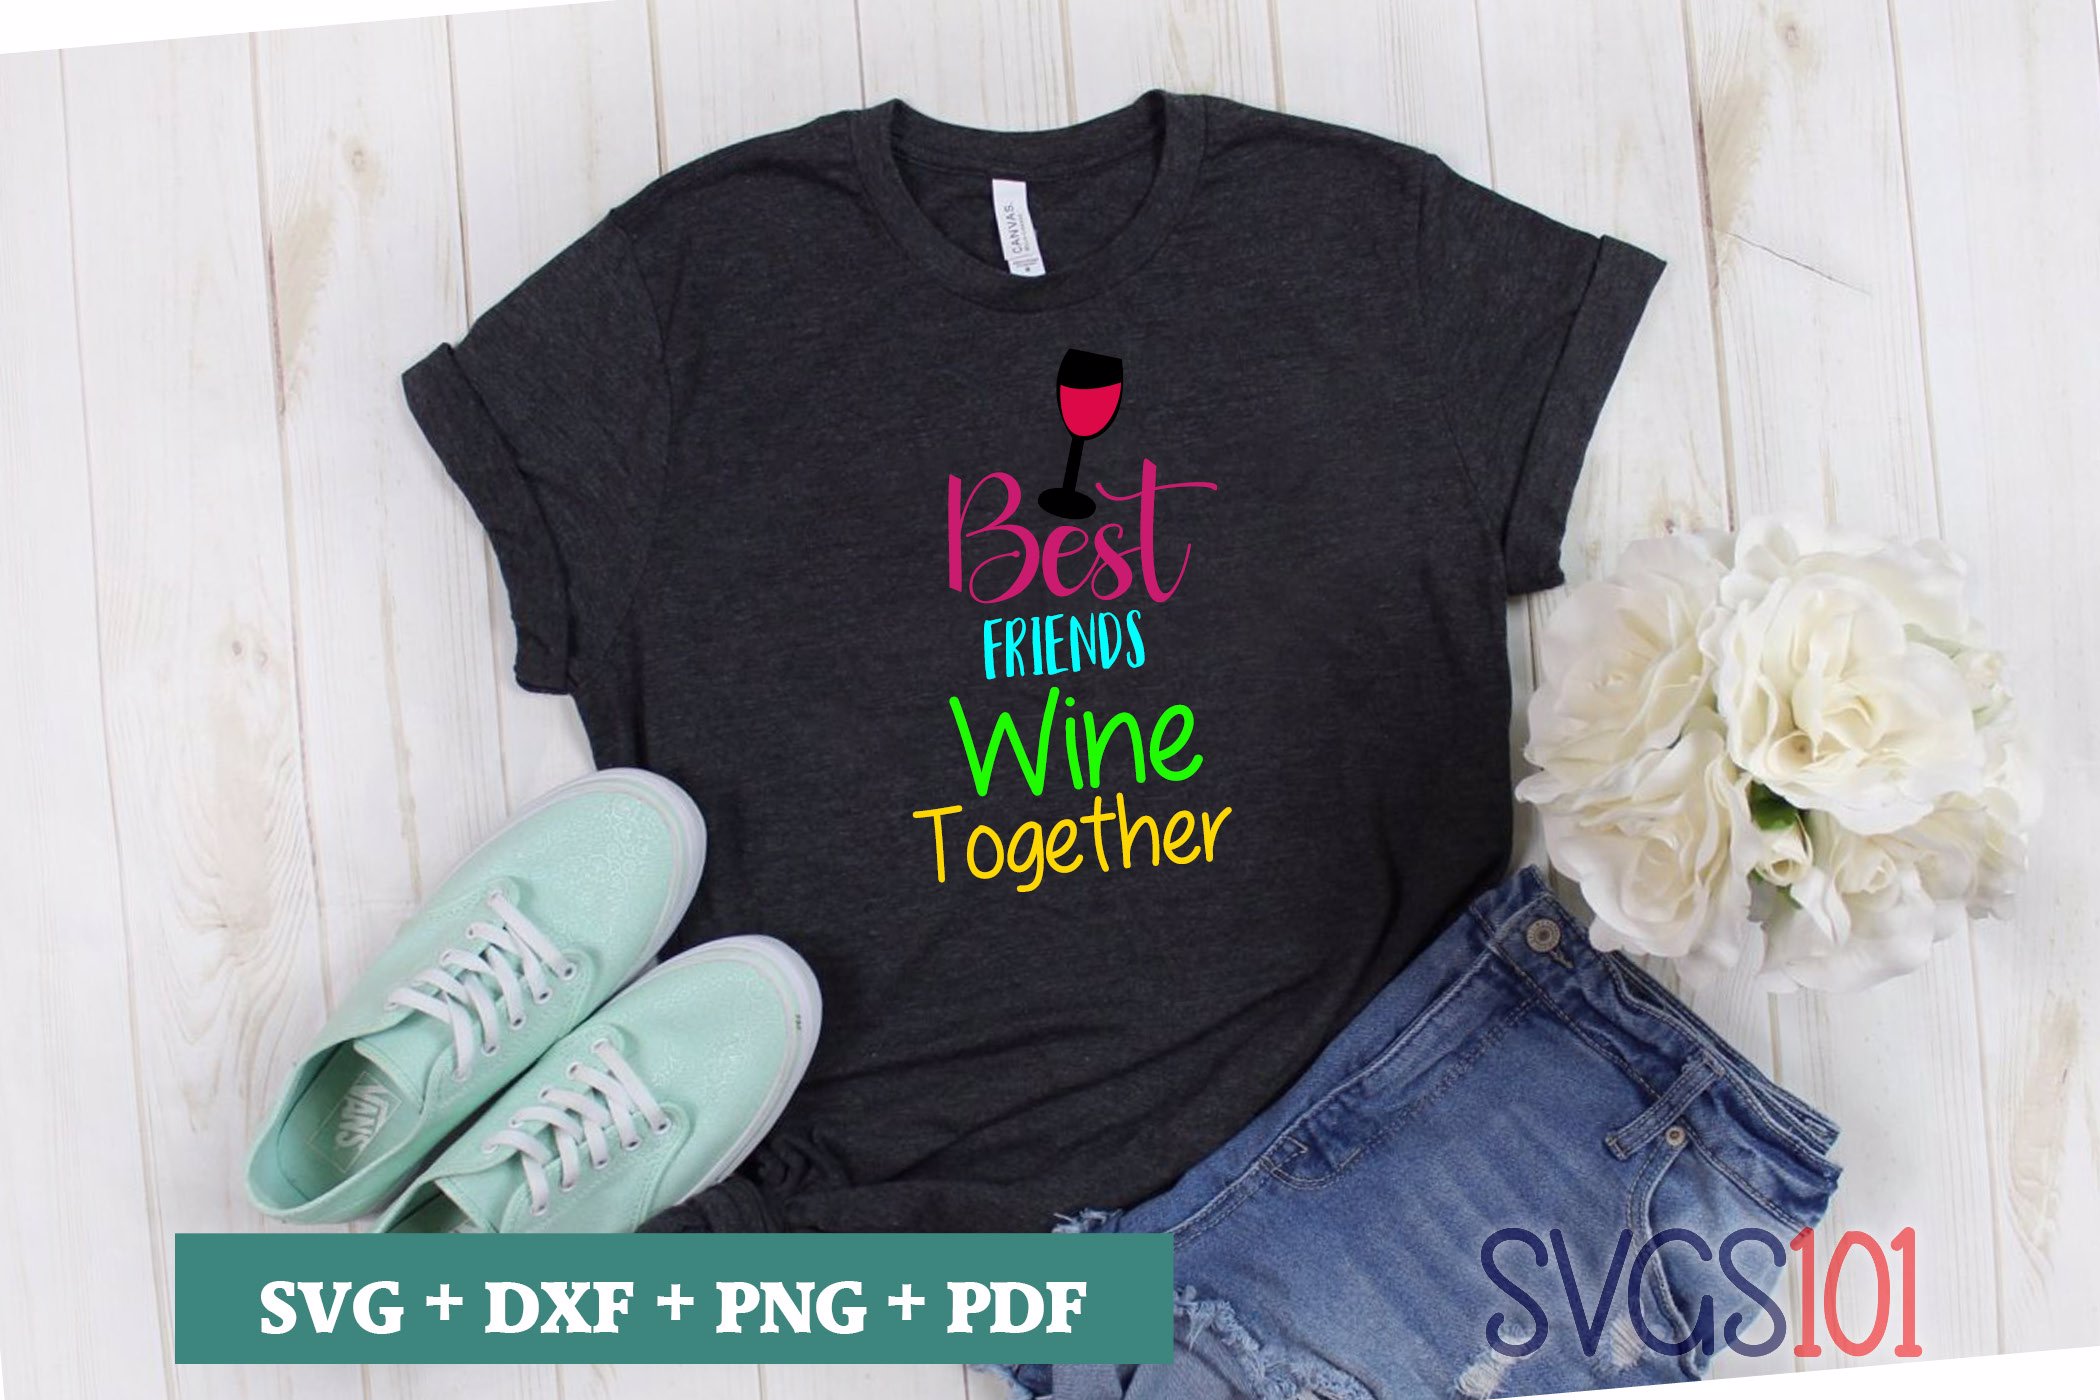 Best Friends Wine Together Svg Cuttable File Dxf Eps Png Pdf Svg Cutting File